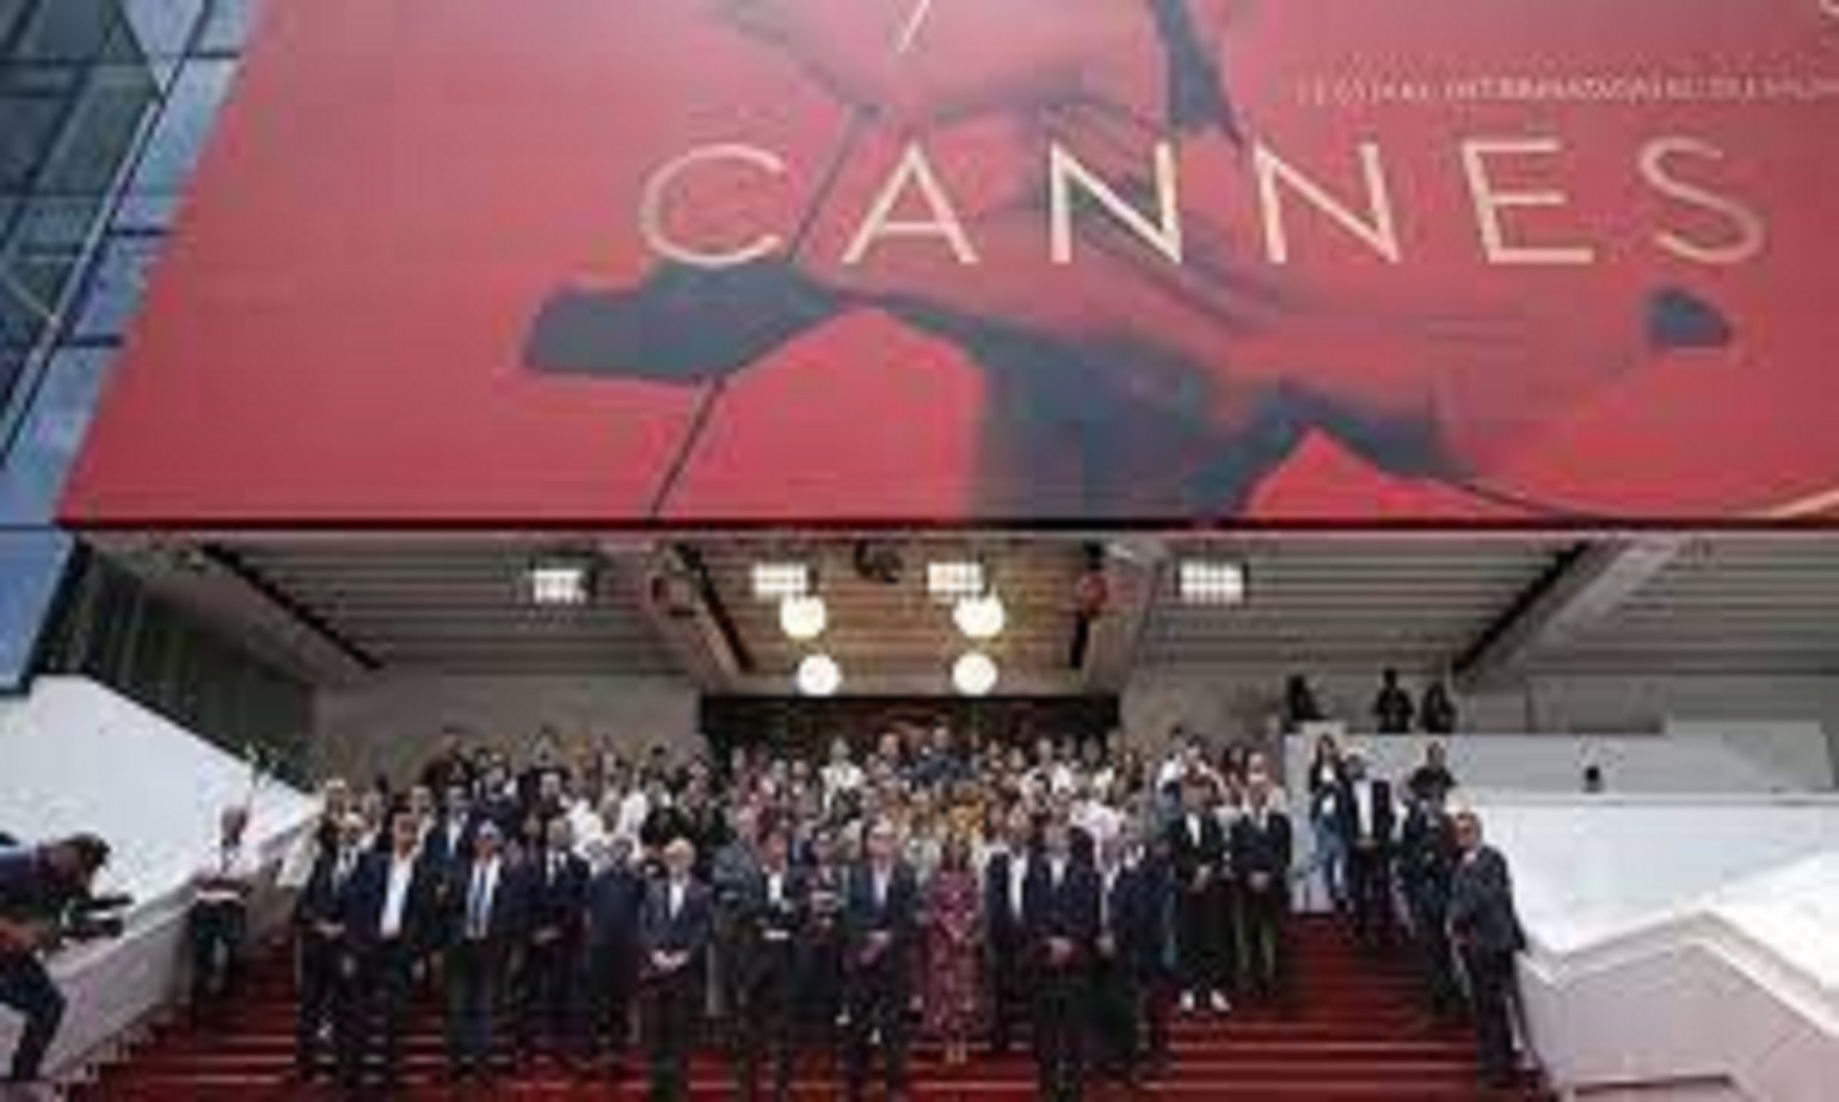 India Chosen As Official Country Of Honour At Cannes Film Market